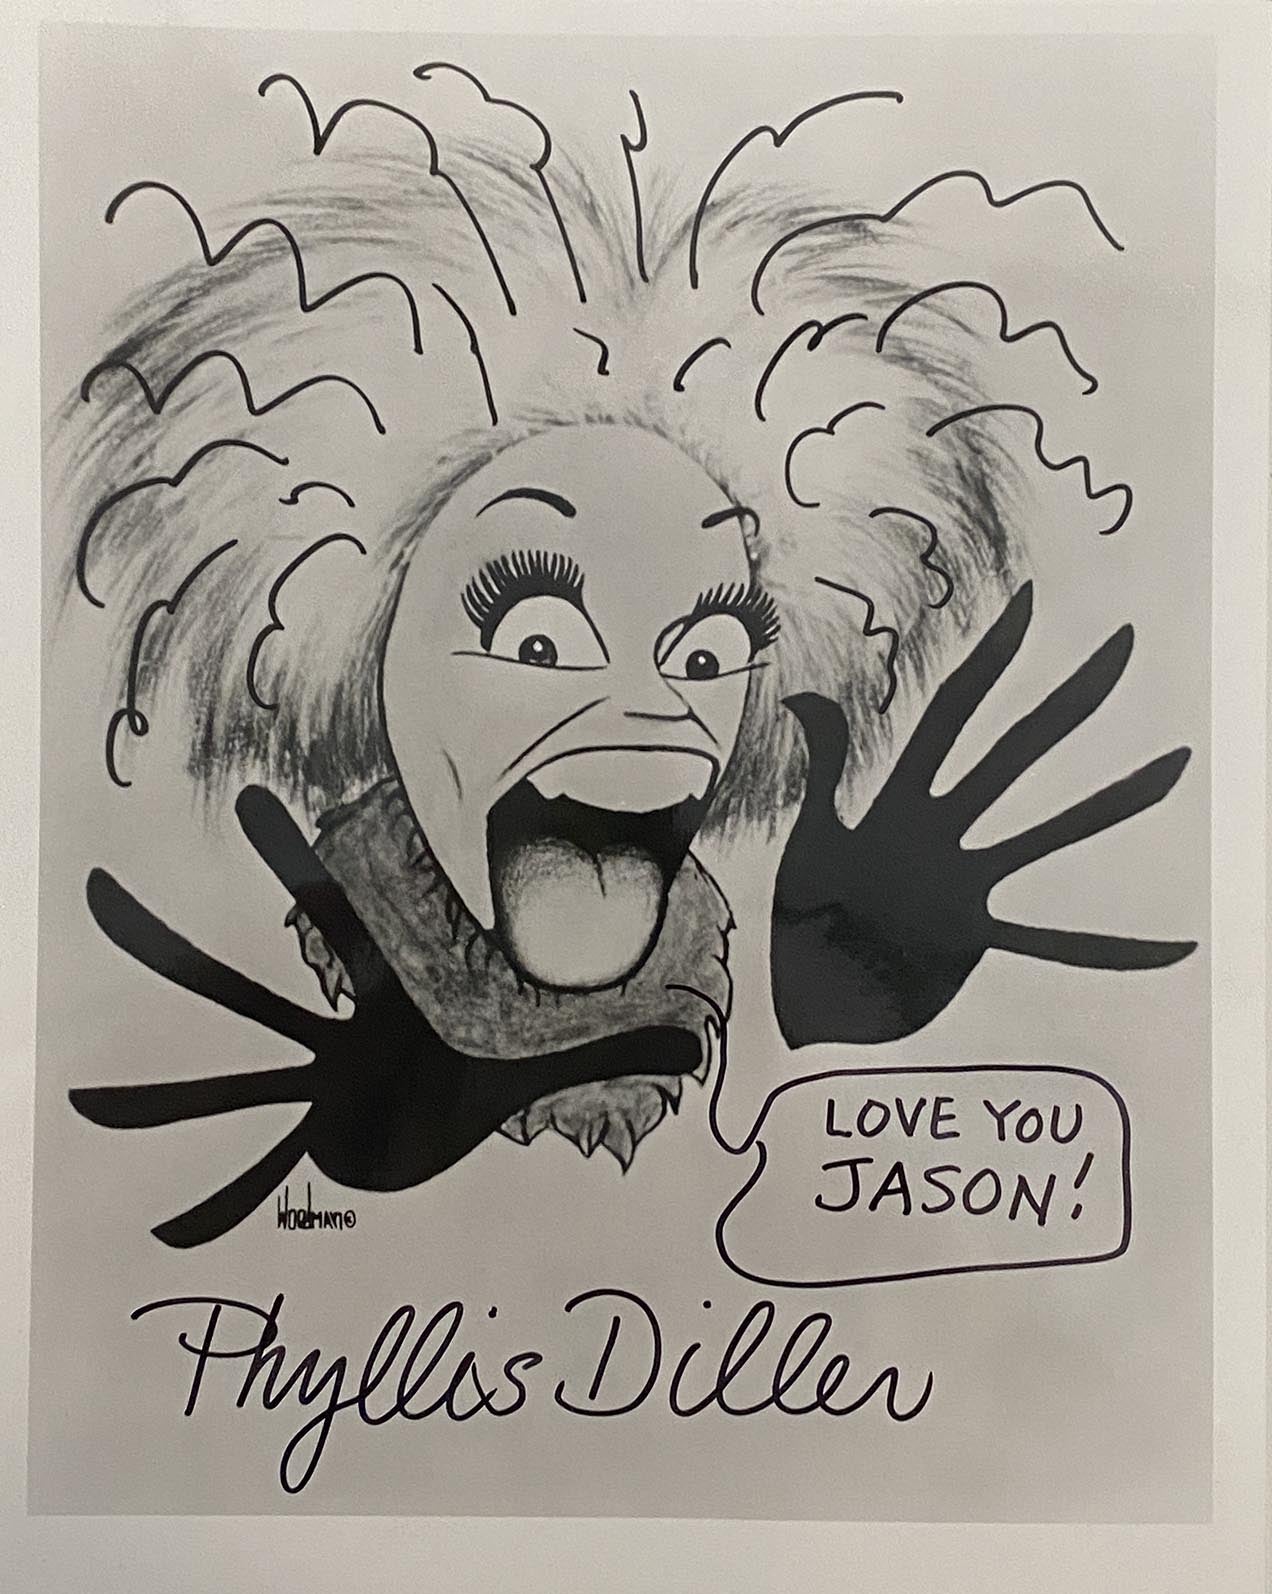 Phyllis Diller signed photo